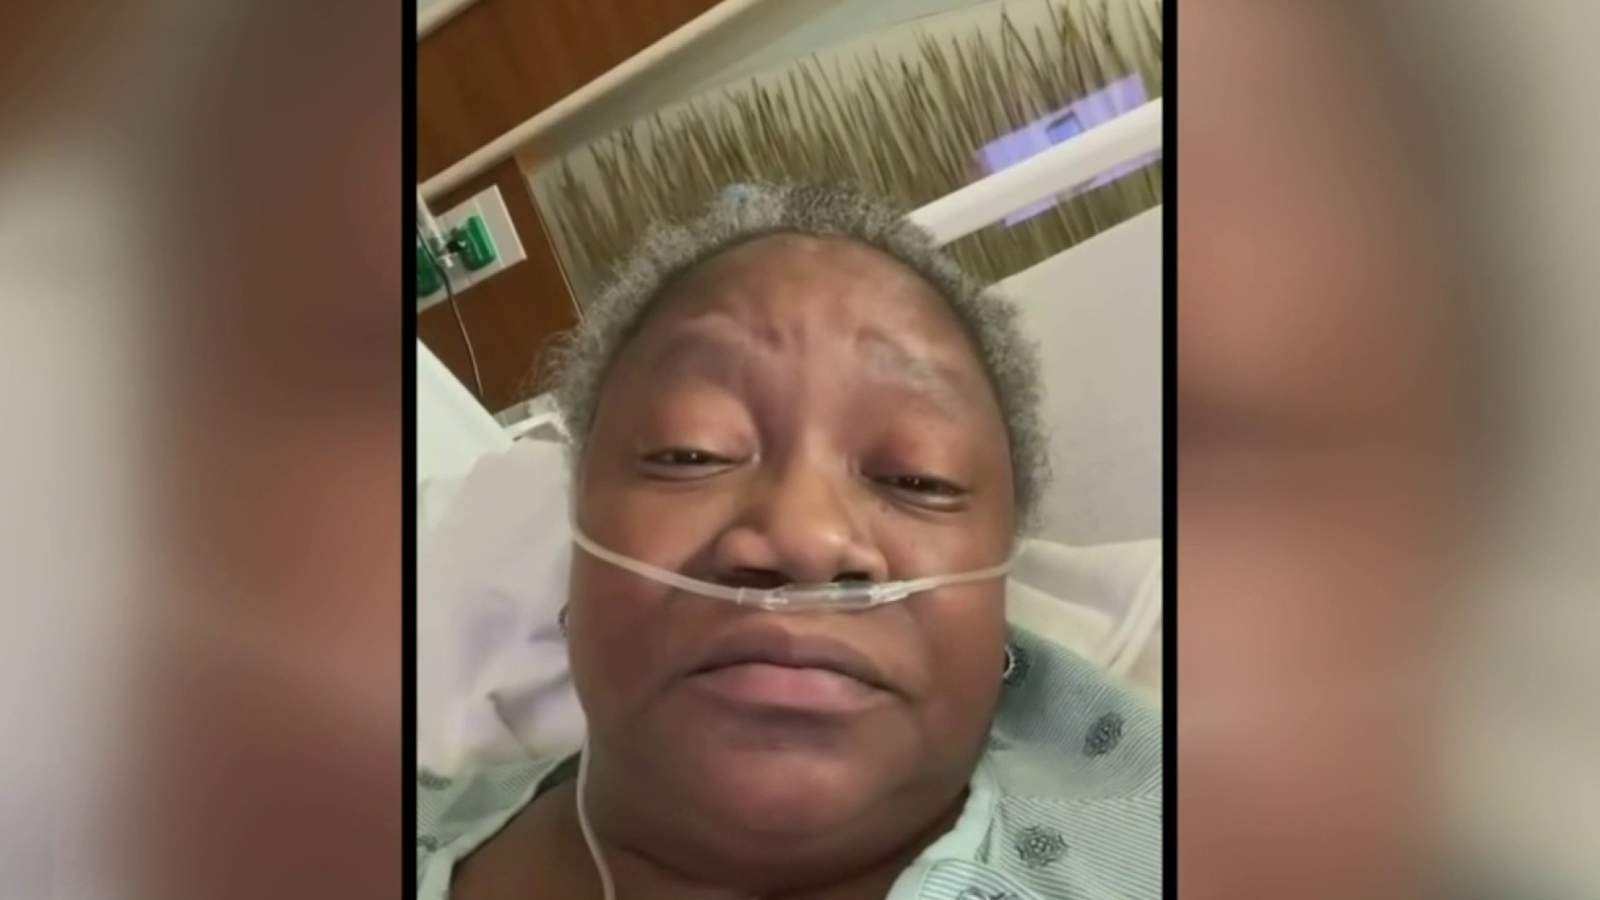 Black doctor, UM graduate recounts racist medical care in viral video before dying of COVID